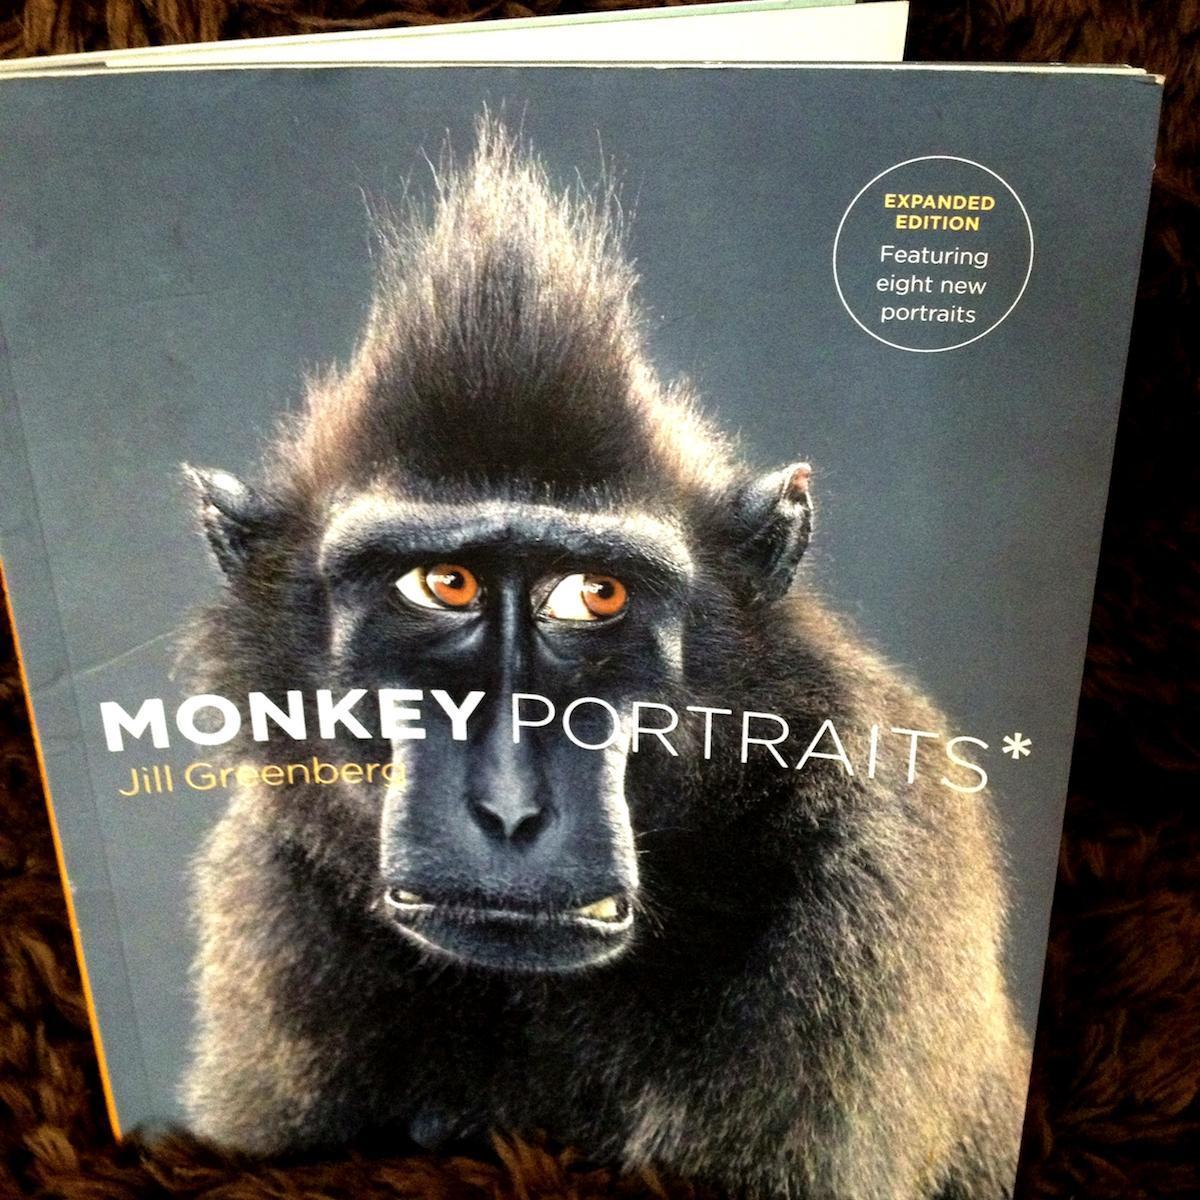 75 delightful photos of primates who reveal their very human-like emotions 
Monkey Portraitsby Jill GreenbergLittle, Brown & Company2007, 128 pages, 8.3 x 10 x 0.4$7 Buy a copy on Amazon
I recently ran across Monkey Portraits at my local used bookstore – The Iliad Bookshop – and couldn’t put it down. Commercial and celebrity photographer Jill Greenberg spent five years photographing monkeys (and some apes) who she met through animal agencies and trainers, ending up with this collection of 75 spectacular primate portraits. The photos are not only technically beautiful but also truly amazing in the way that Greenberg so perfectly captured the expressions and emotions of these creatures. Animal books aren’t usually my thing, but with this book I studied every monkey on every page, laughing especially hard at the ones who reminded me of someone I knew. These photographs are a reminder of how similar primates are to humans, and how similar humans are to primates. – Carla Sinclair
Note: I bought the paperback, which costs $7 via the link above. A hardback also exists at that link, but the cost will jump to $21.